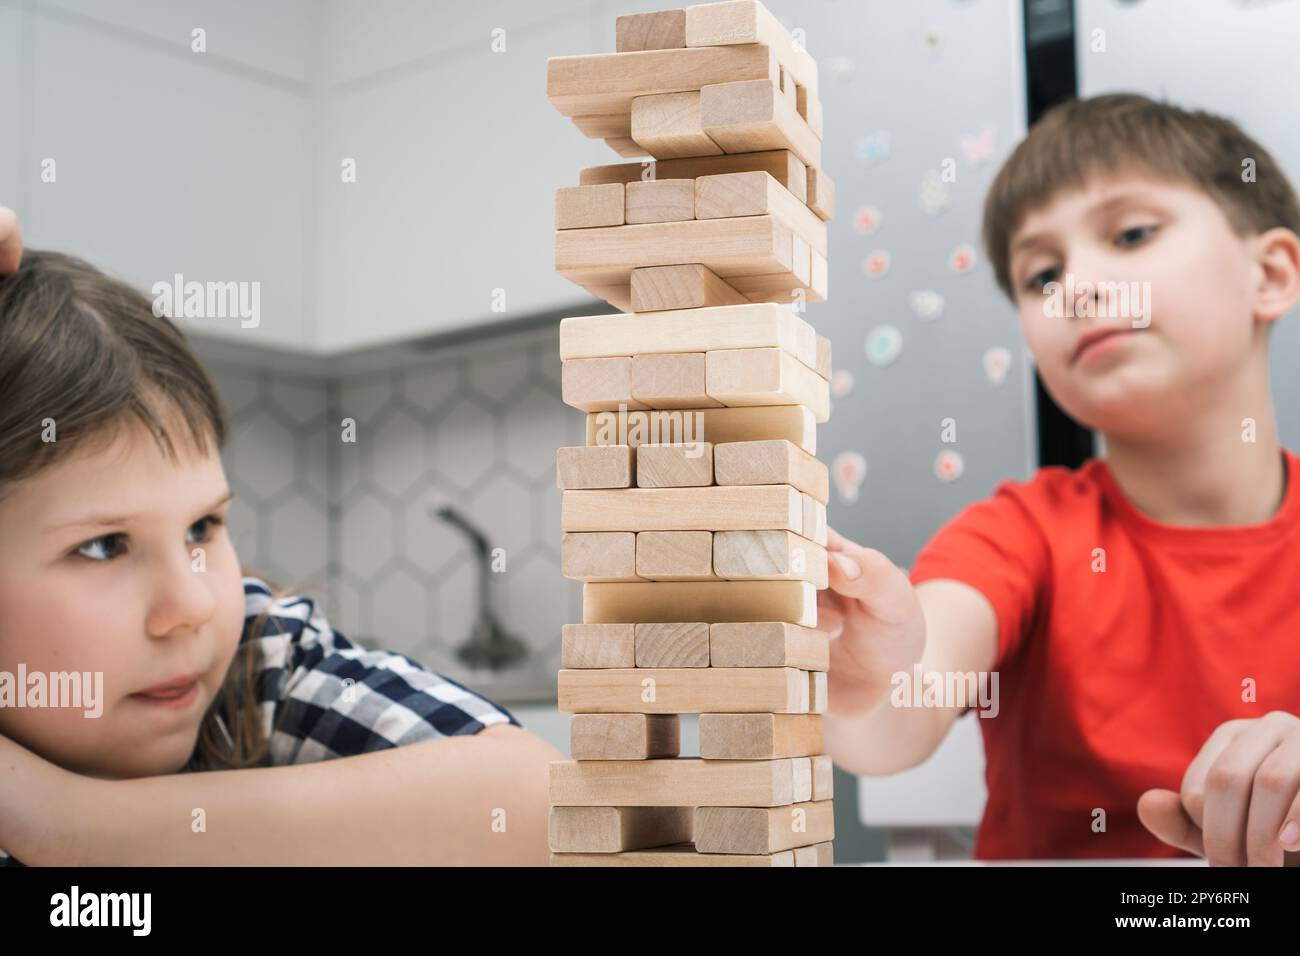 School kids play tower sitting at table closeup. Boy and girl build tower from little wooden blocks keeping balance. Stock Photo